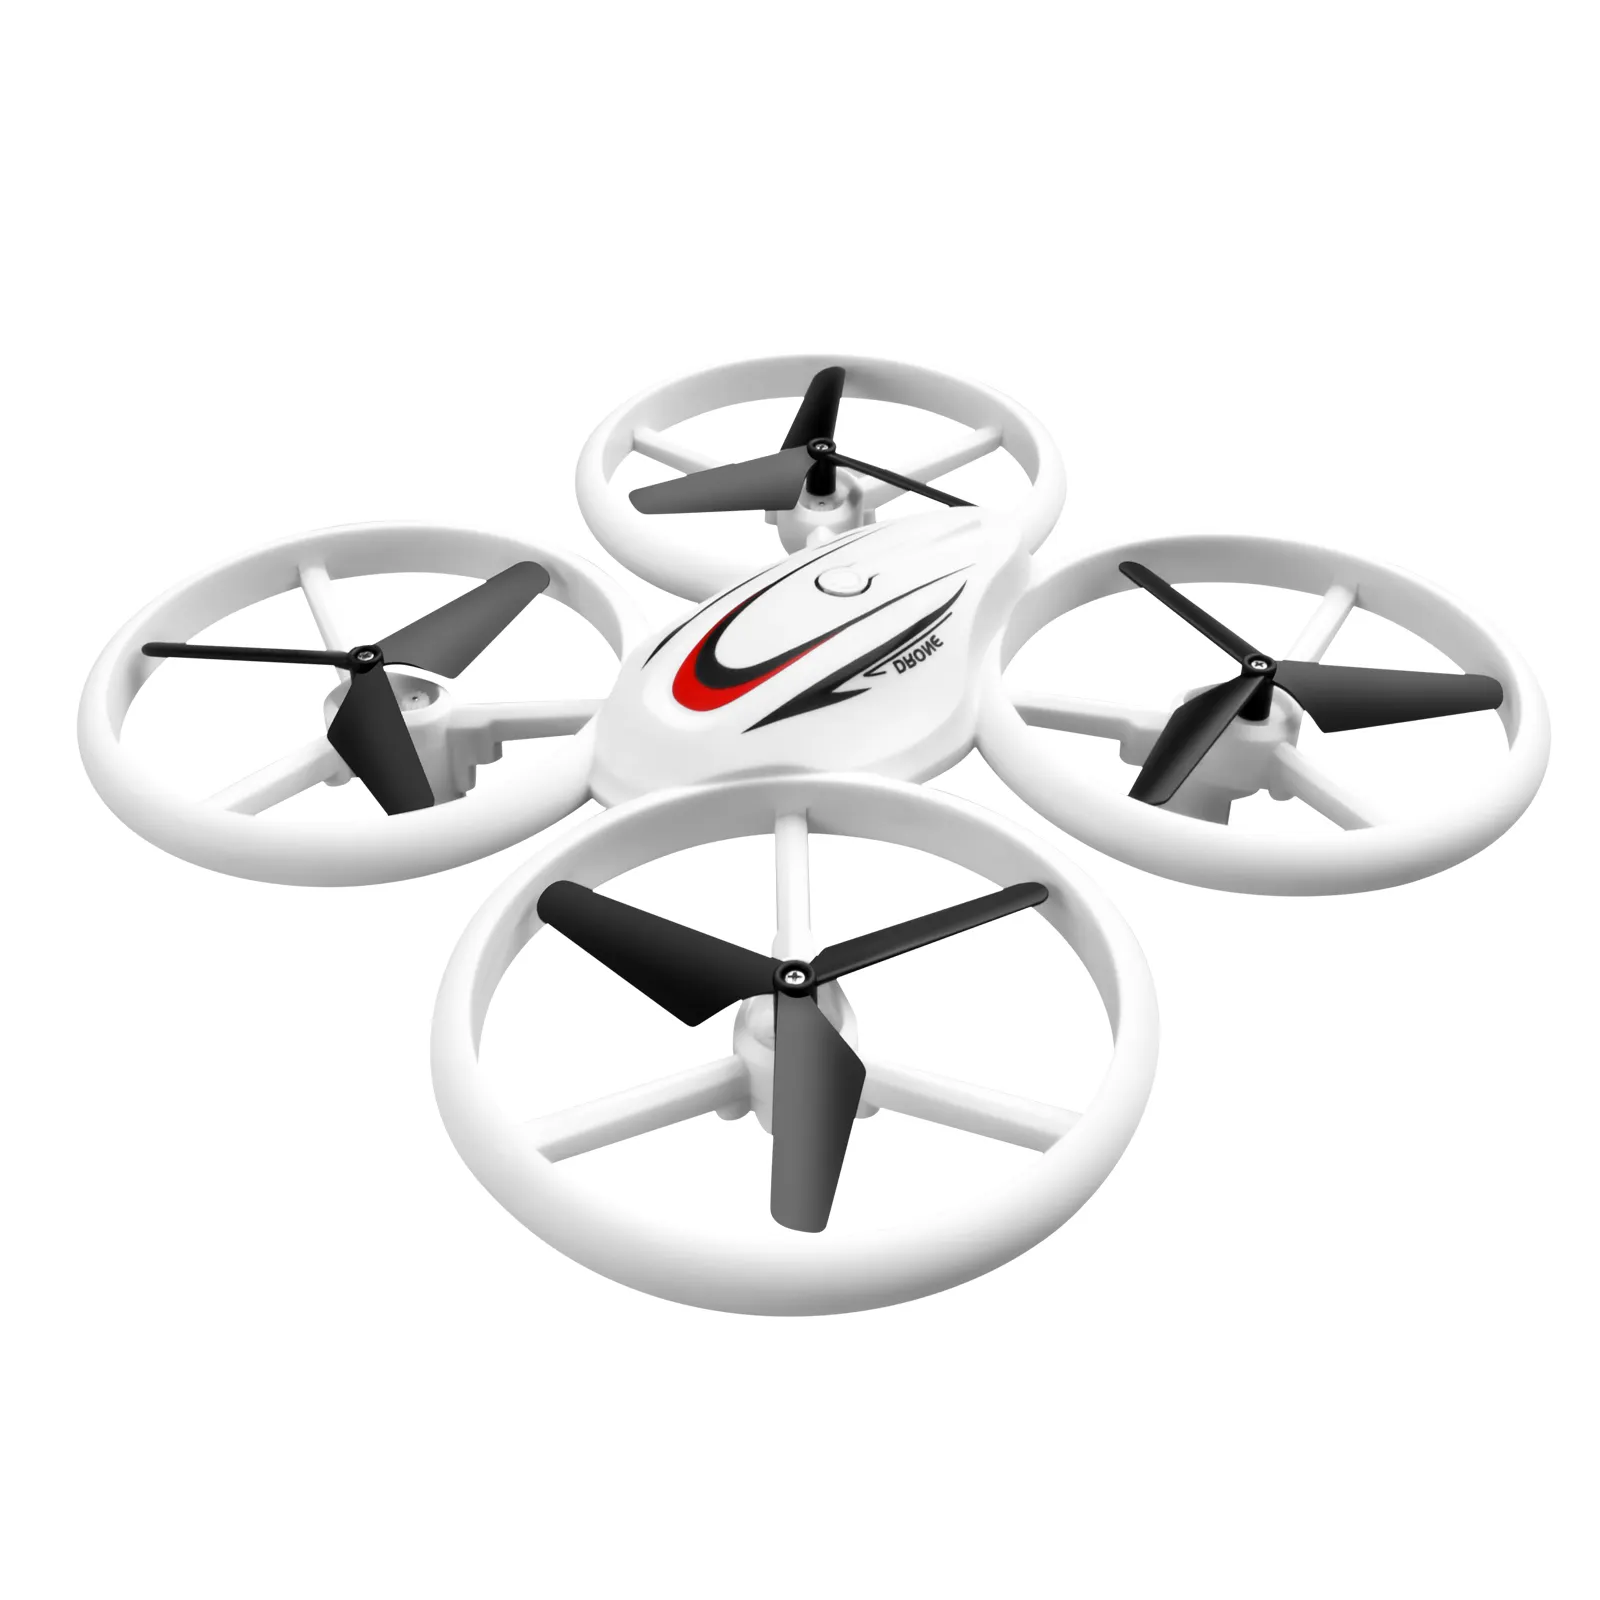 S123 Mini Drone Beginners Rc Helicopter Plane With Hovering 3D Flip Toys For Boys And Rc Quadcopter Best Drone For Kids